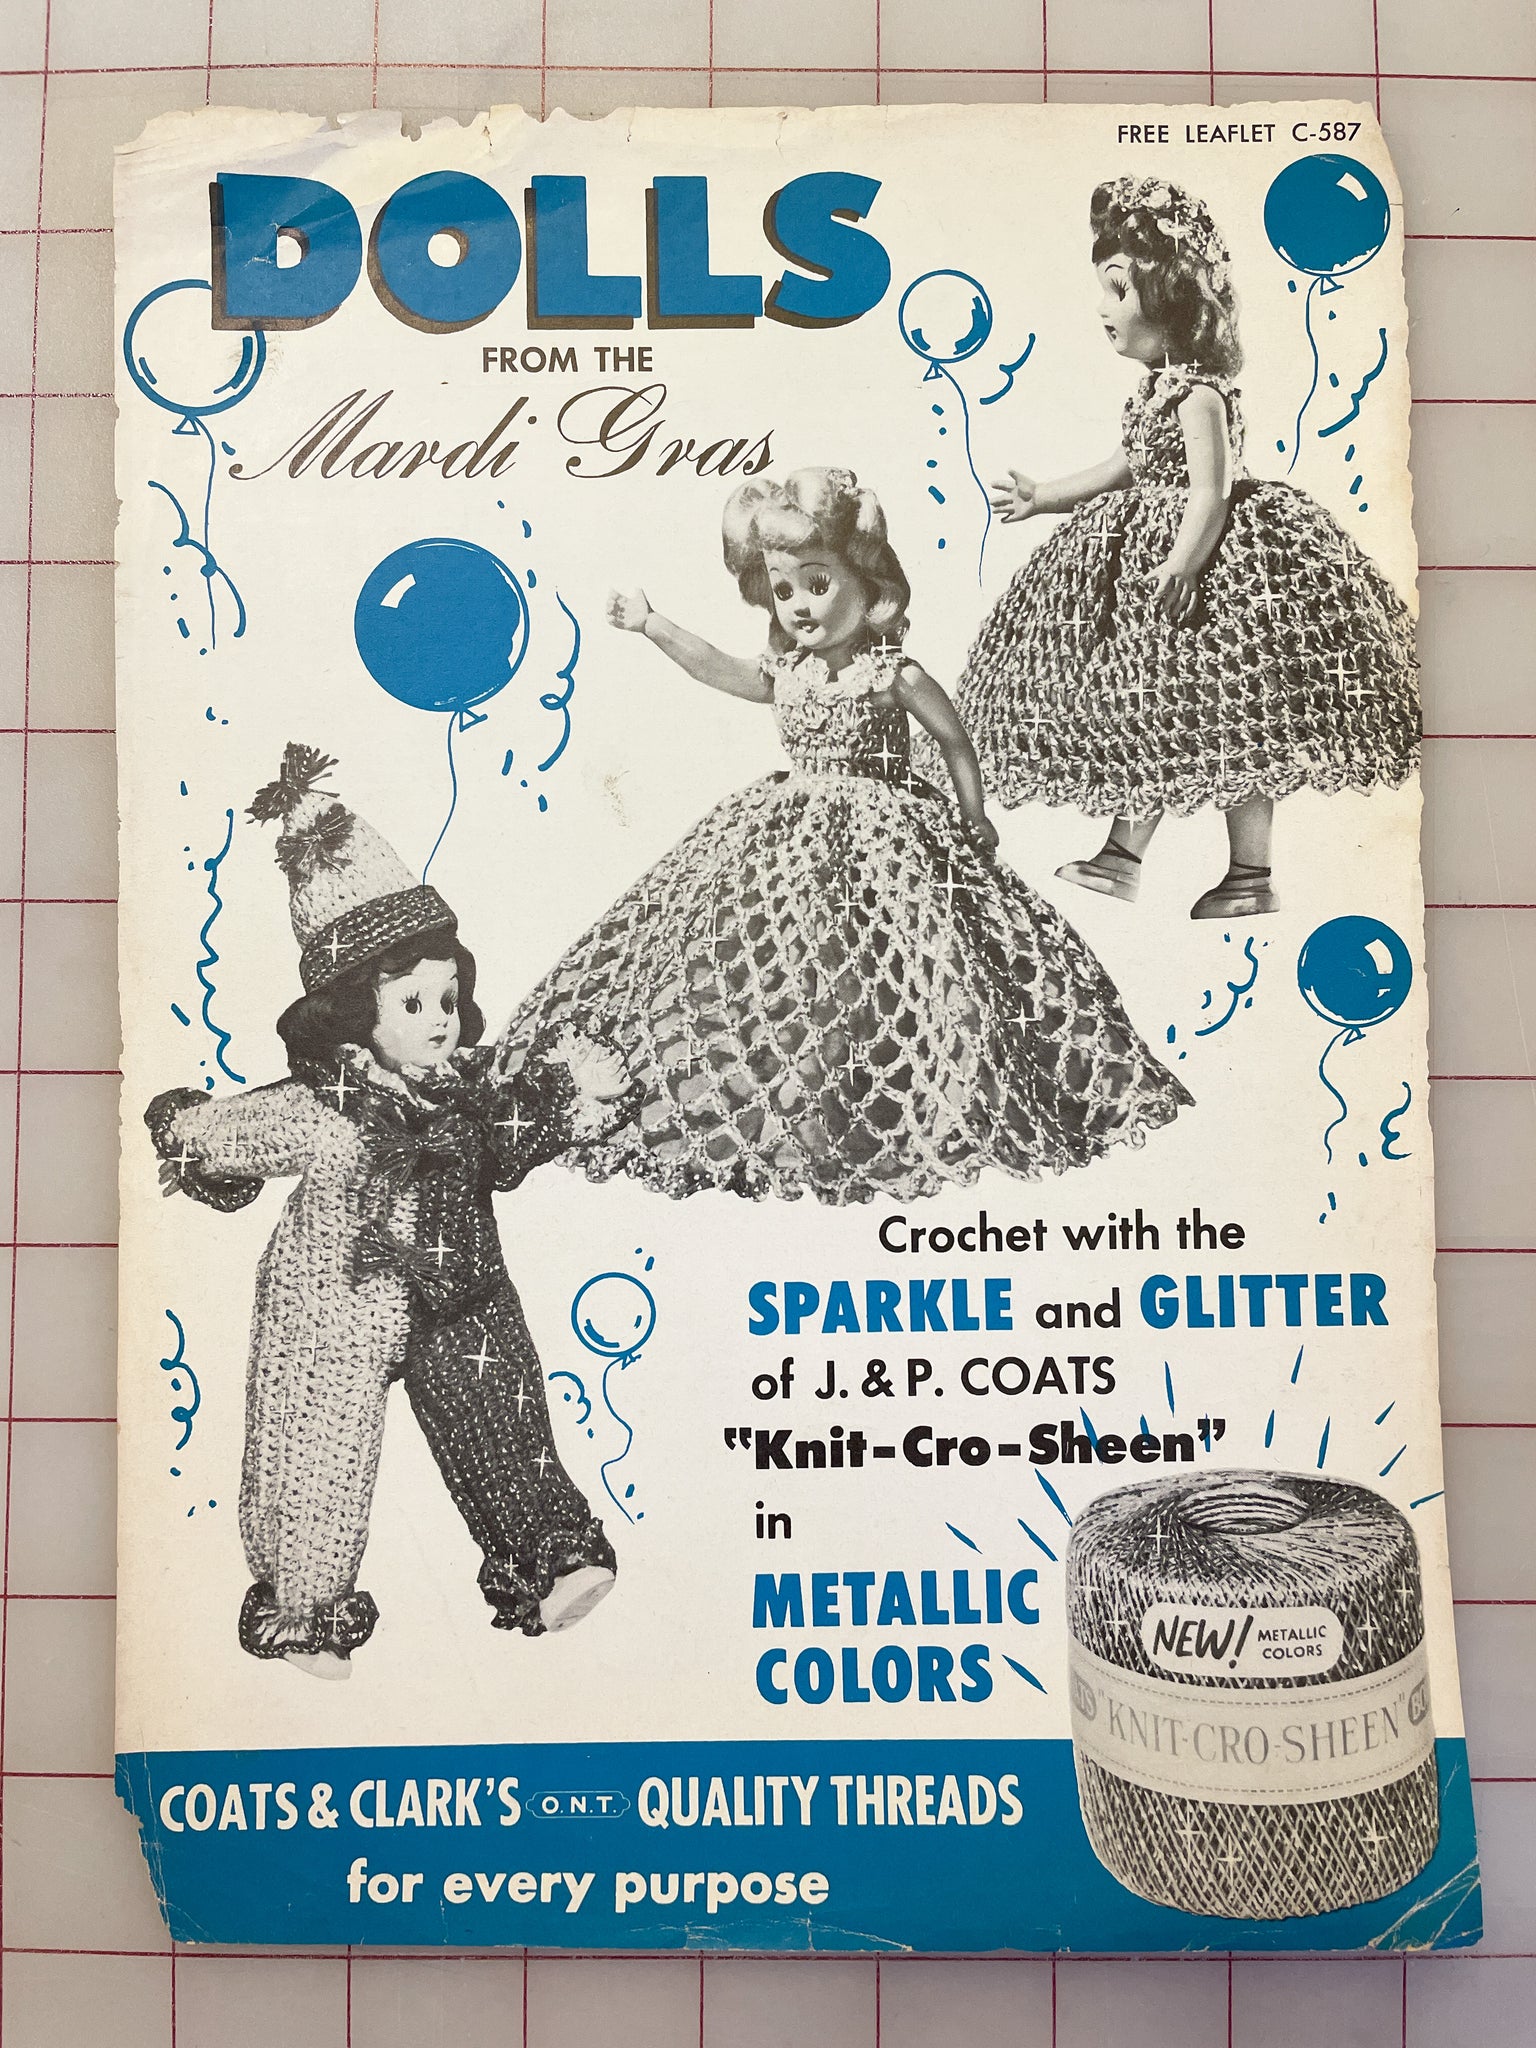 SALE 1954 Leaflet C-587 - Dolls From the Mardi Gras